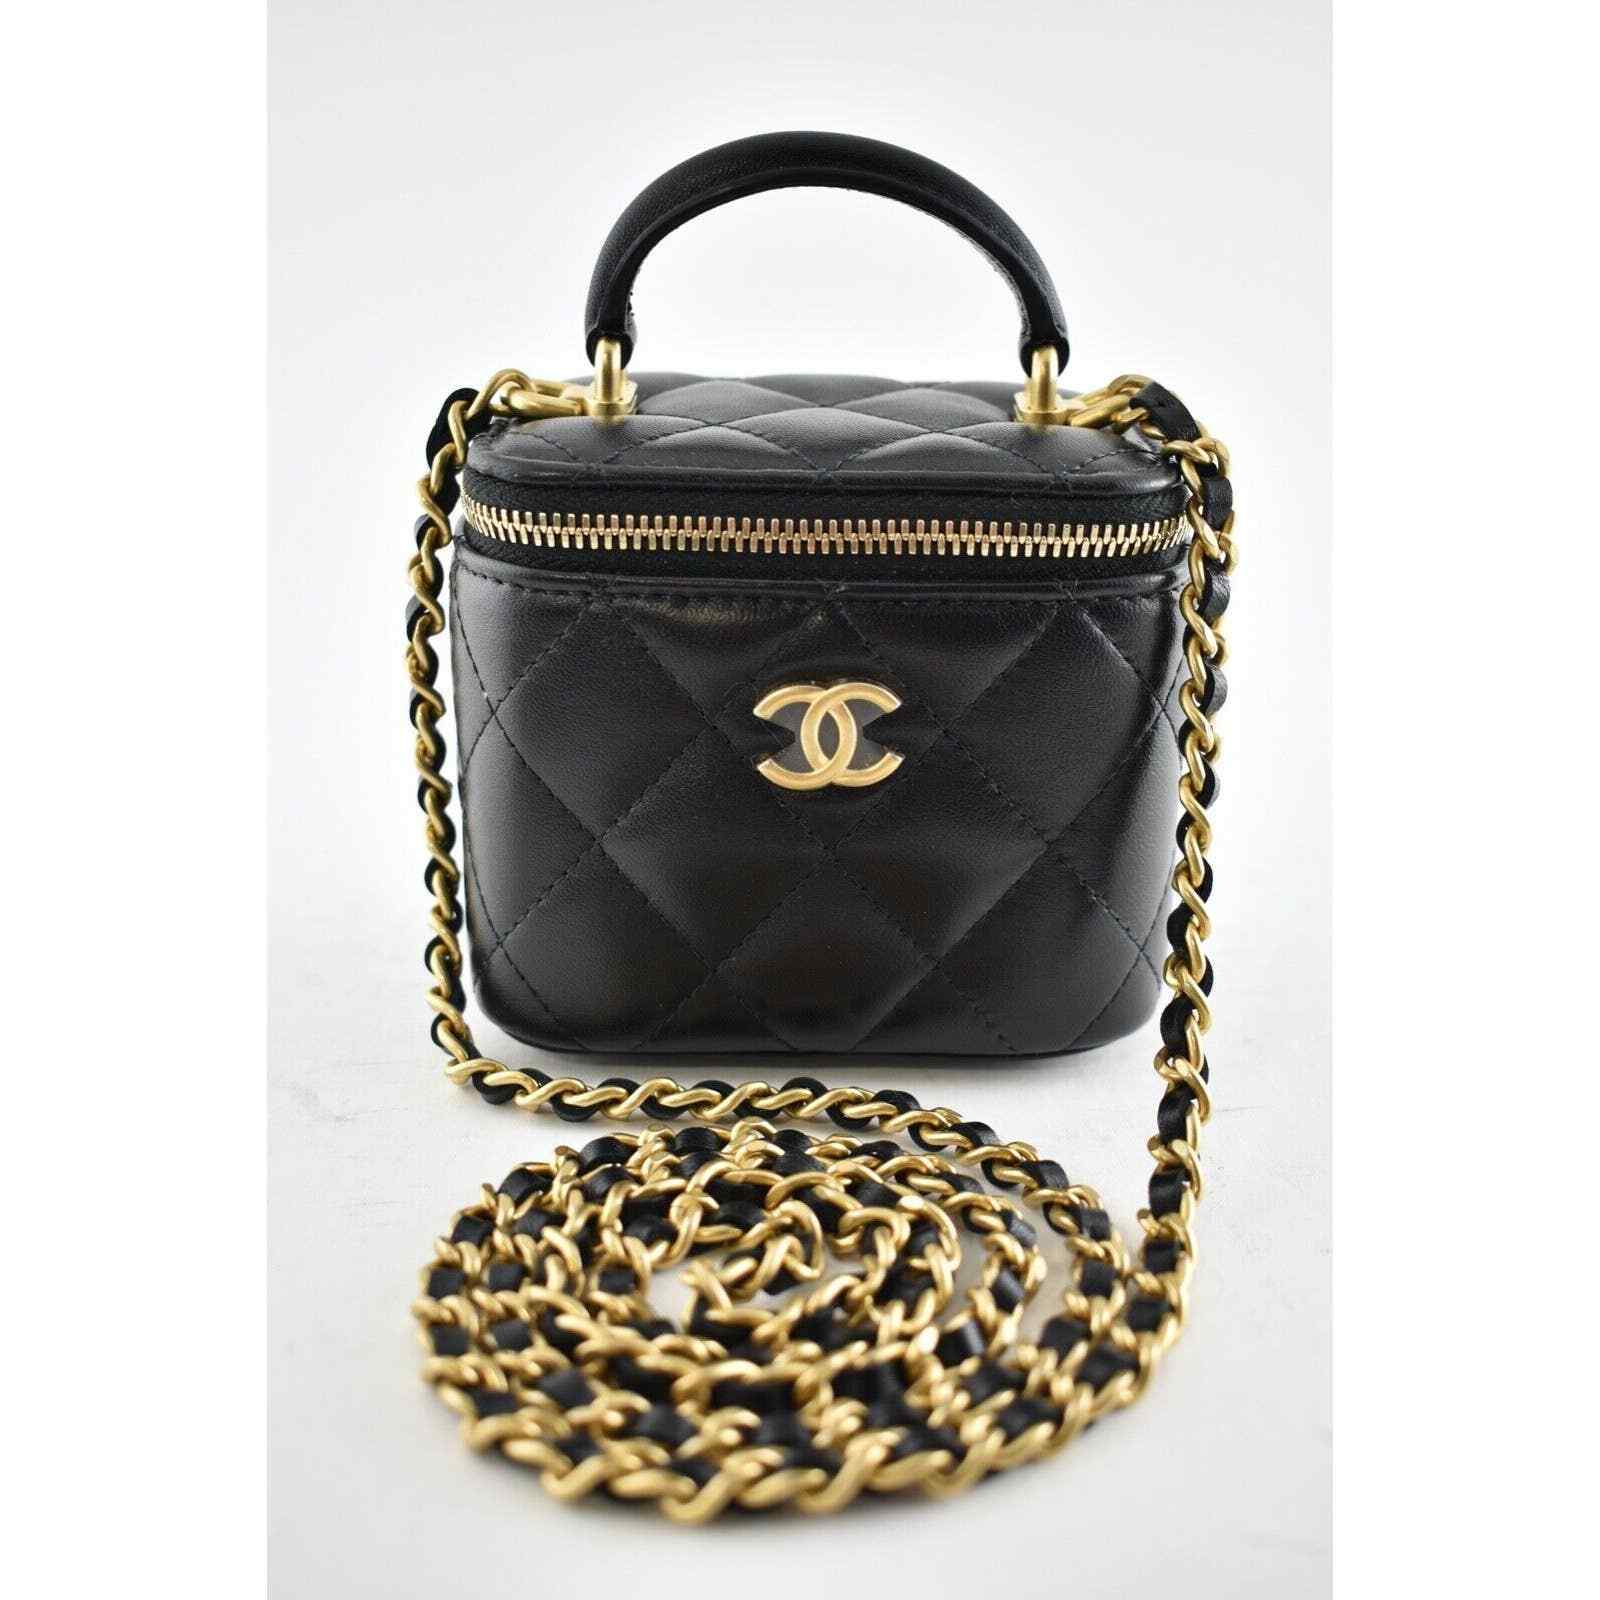 quilting crossbody chanel bags